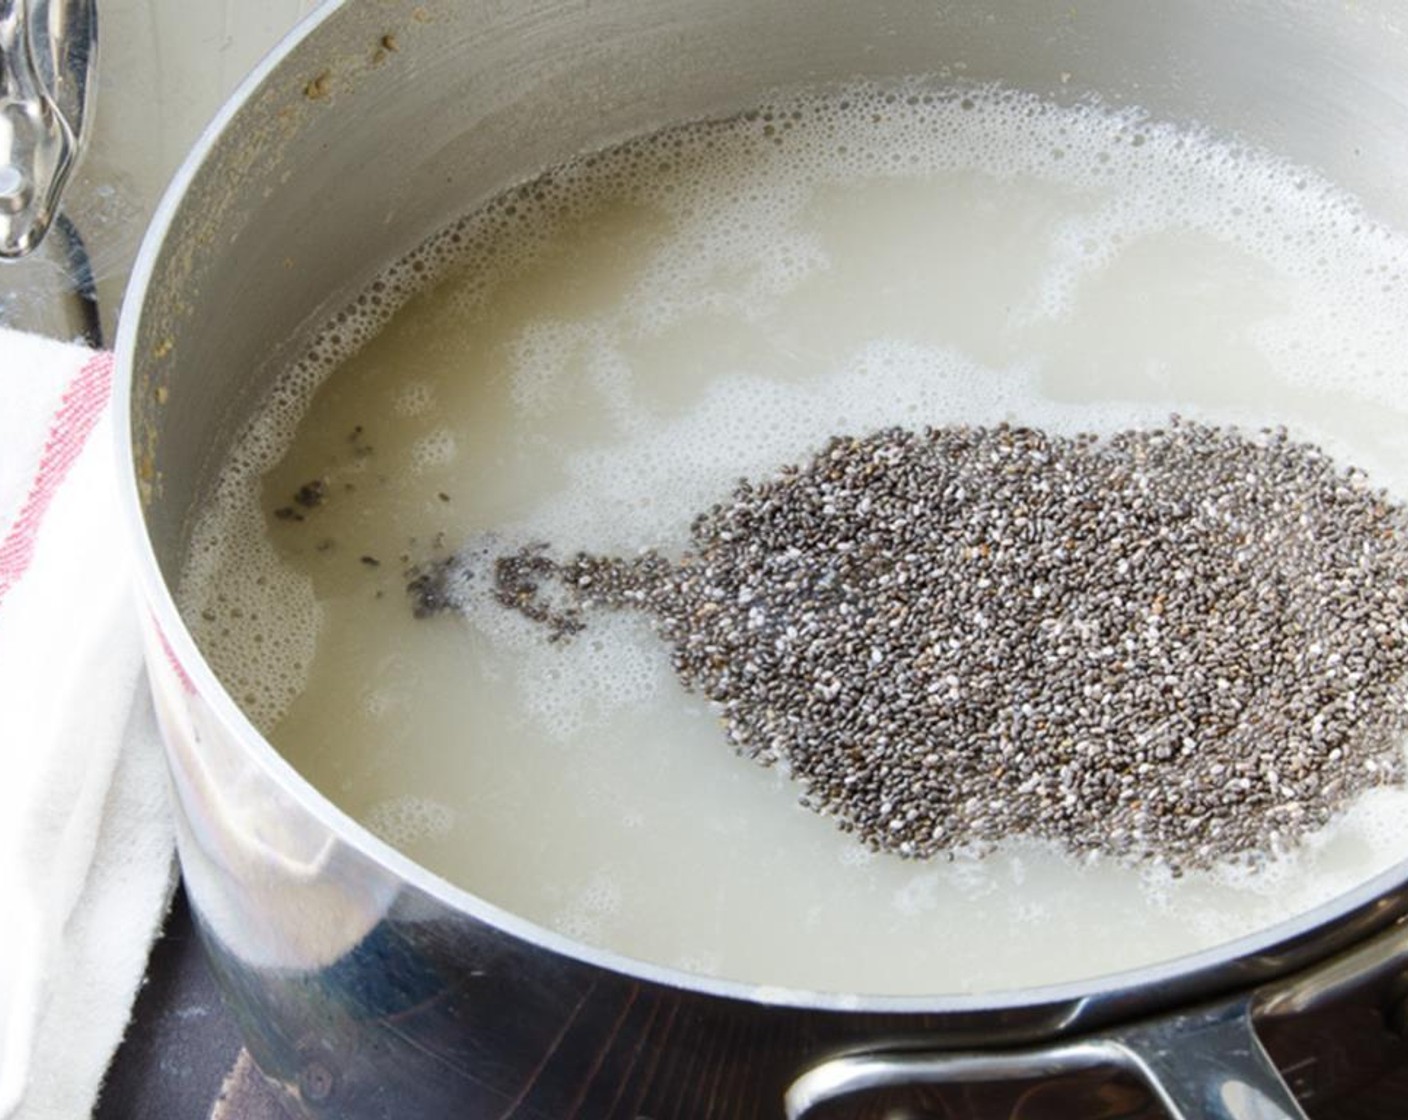 step 2 Remove the pan from the heat and whisk in the Chia Seeds (1 Tbsp) so they are mixed evenly throughout. Place the lid on the pan and set aside for at least 4 hours or overnight.